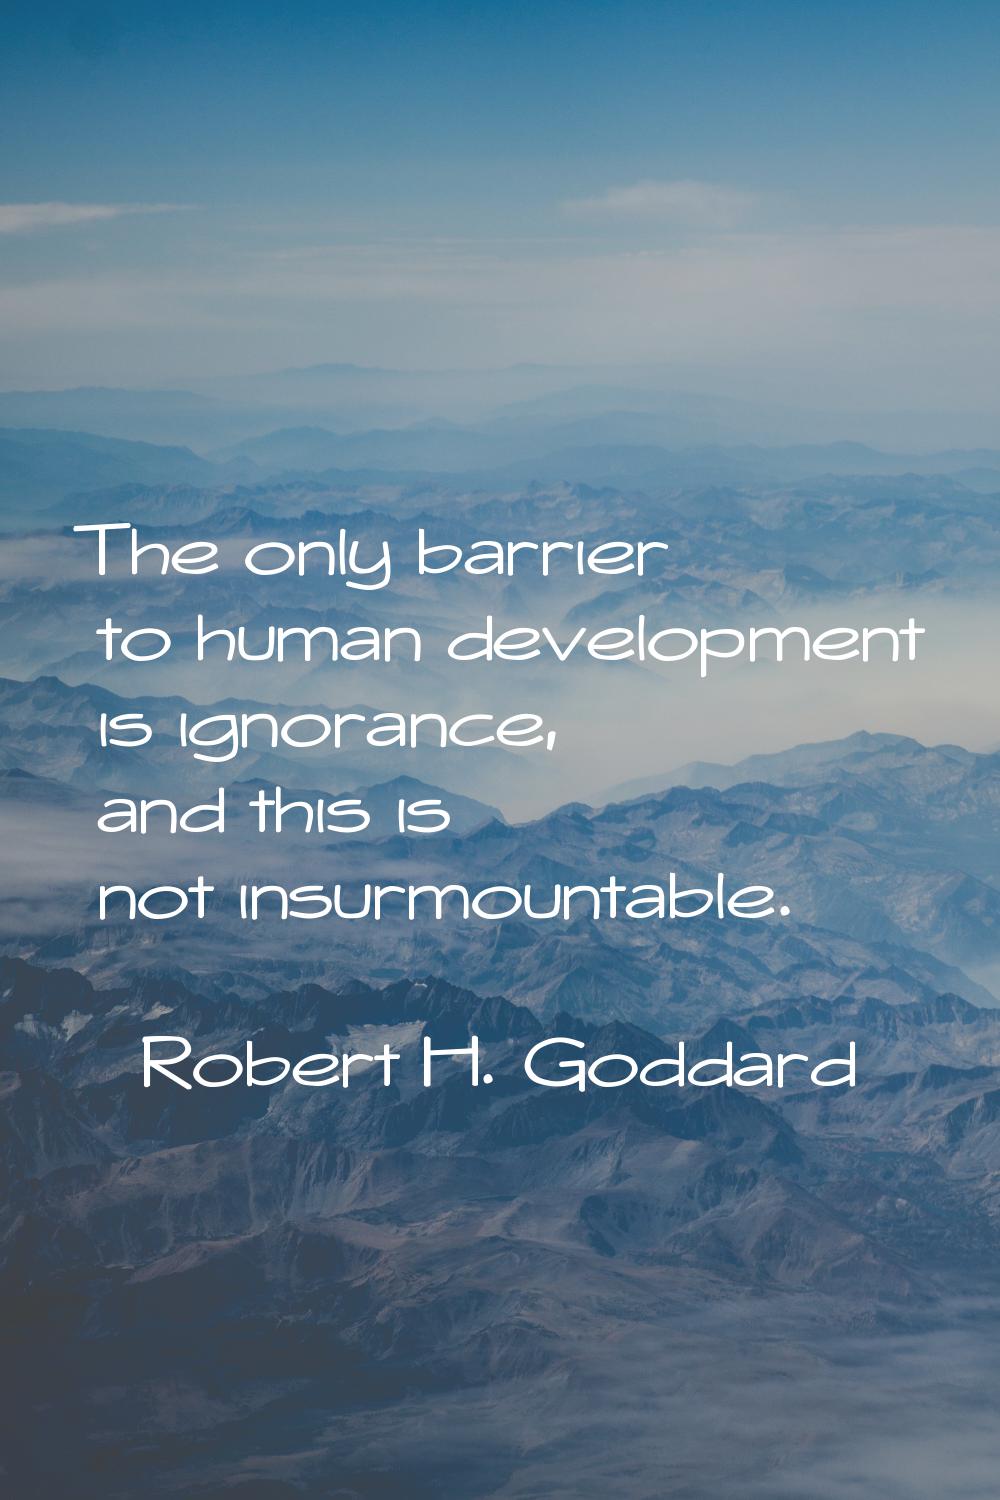 The only barrier to human development is ignorance, and this is not insurmountable.